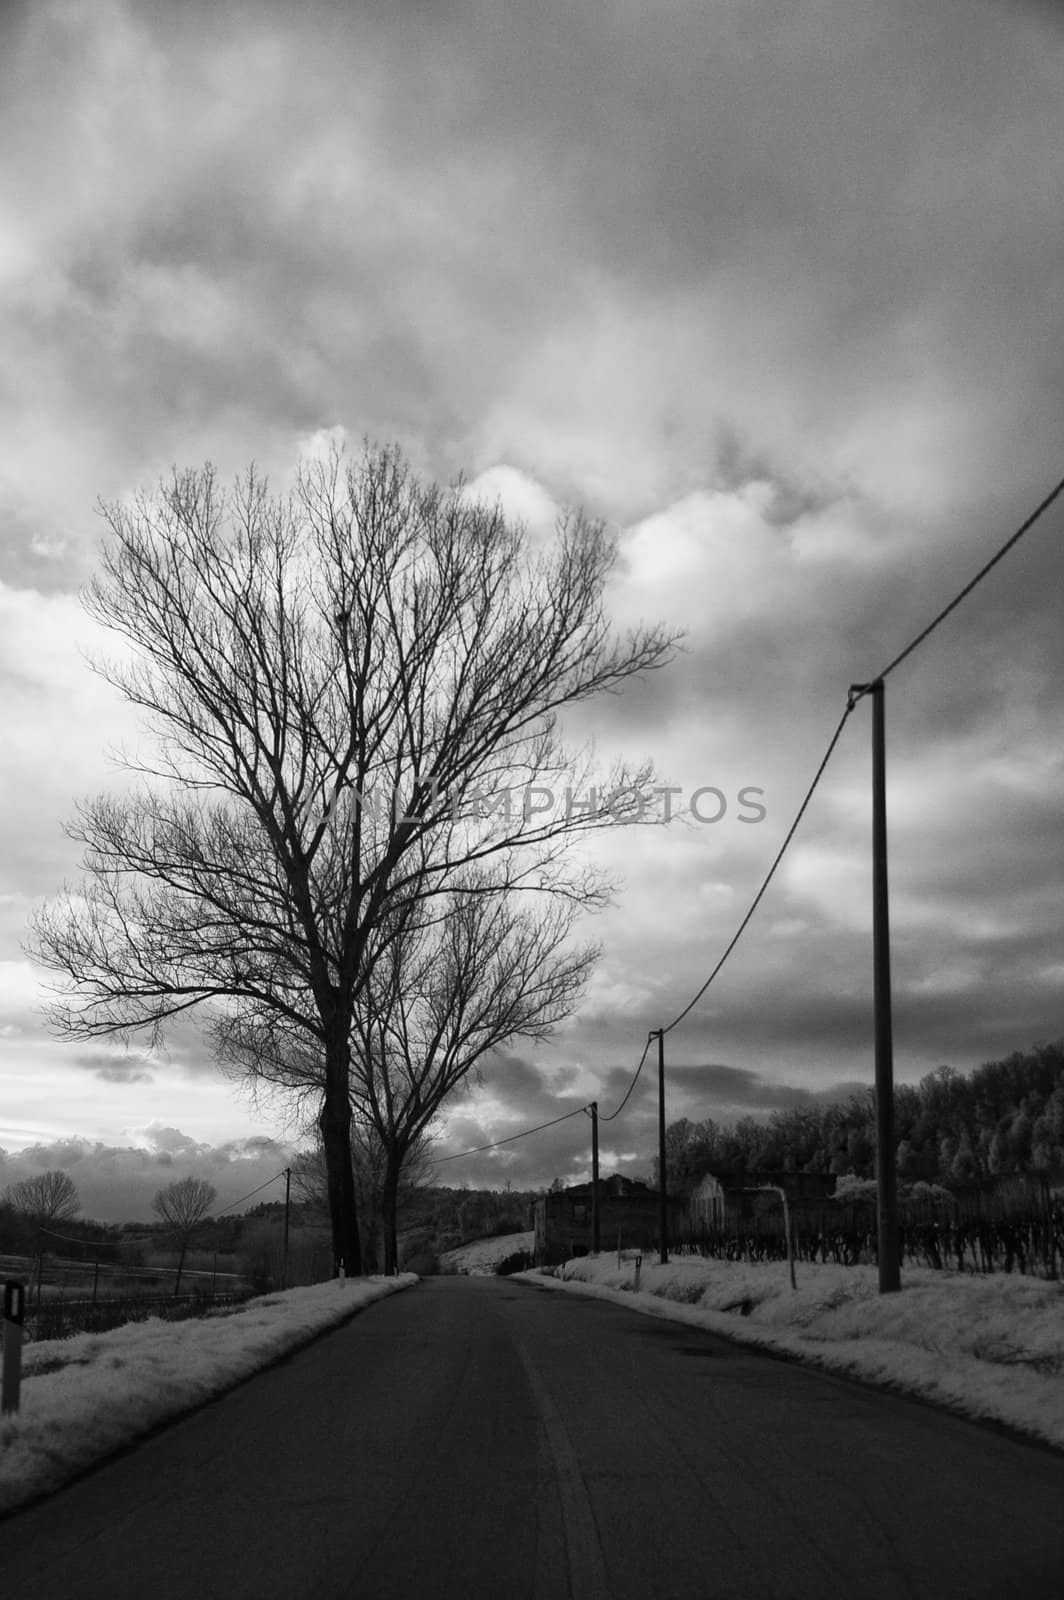 Countryside in Tuscany, Italy, Infrared Black and White Picture